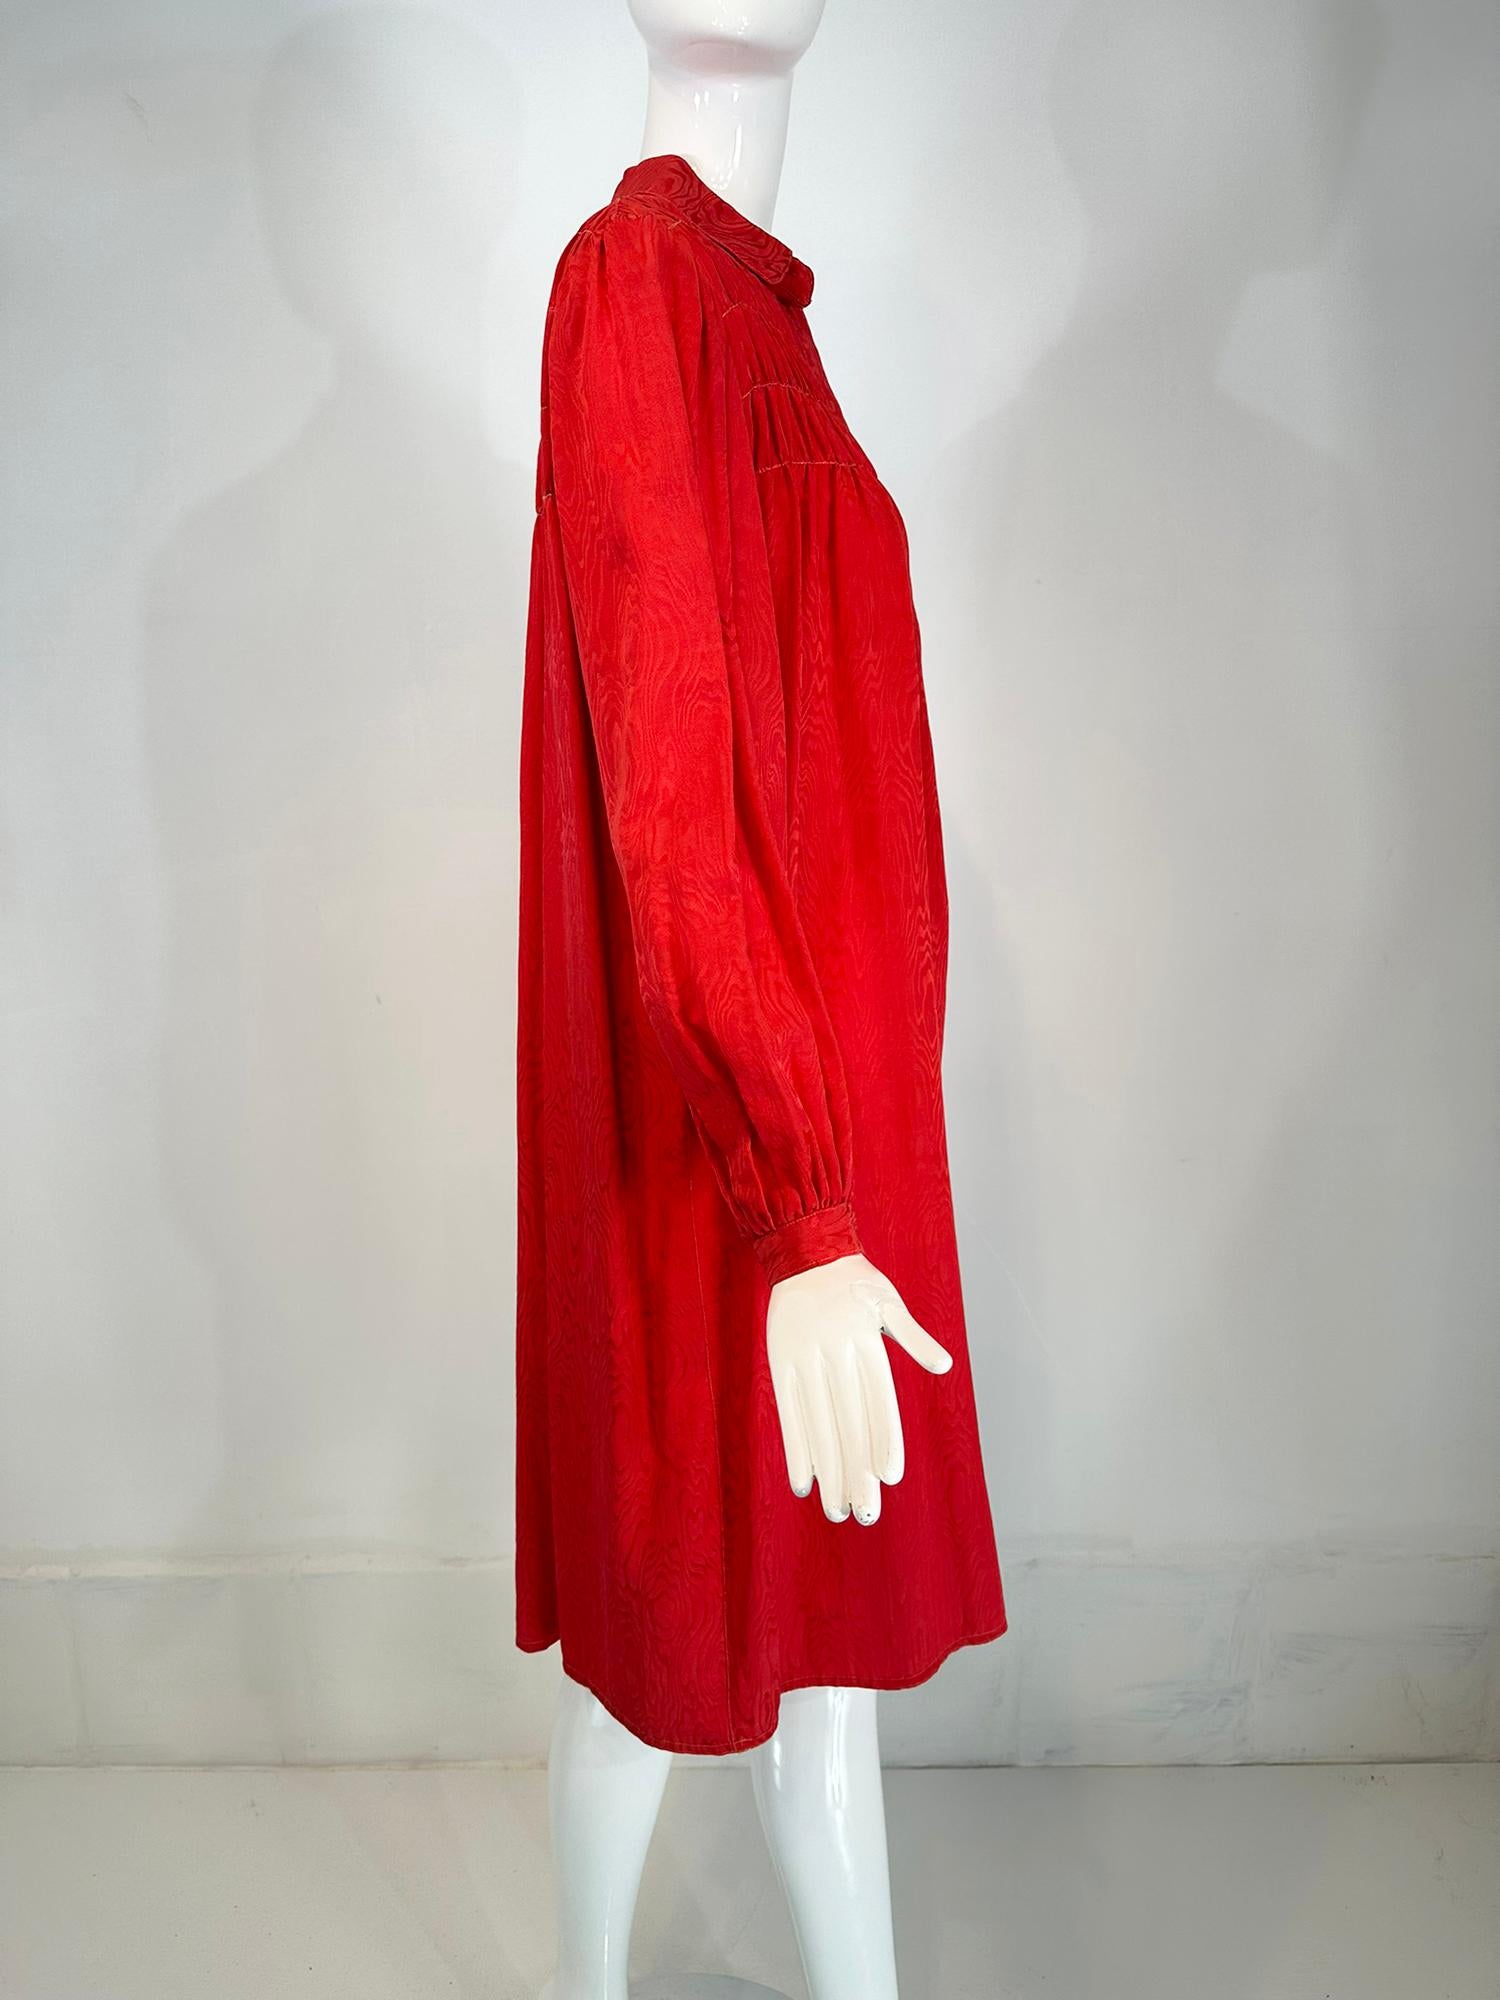 Geoffrey Beene Coral Red Silk Jacquard Smock Dress 1970s For Sale 6